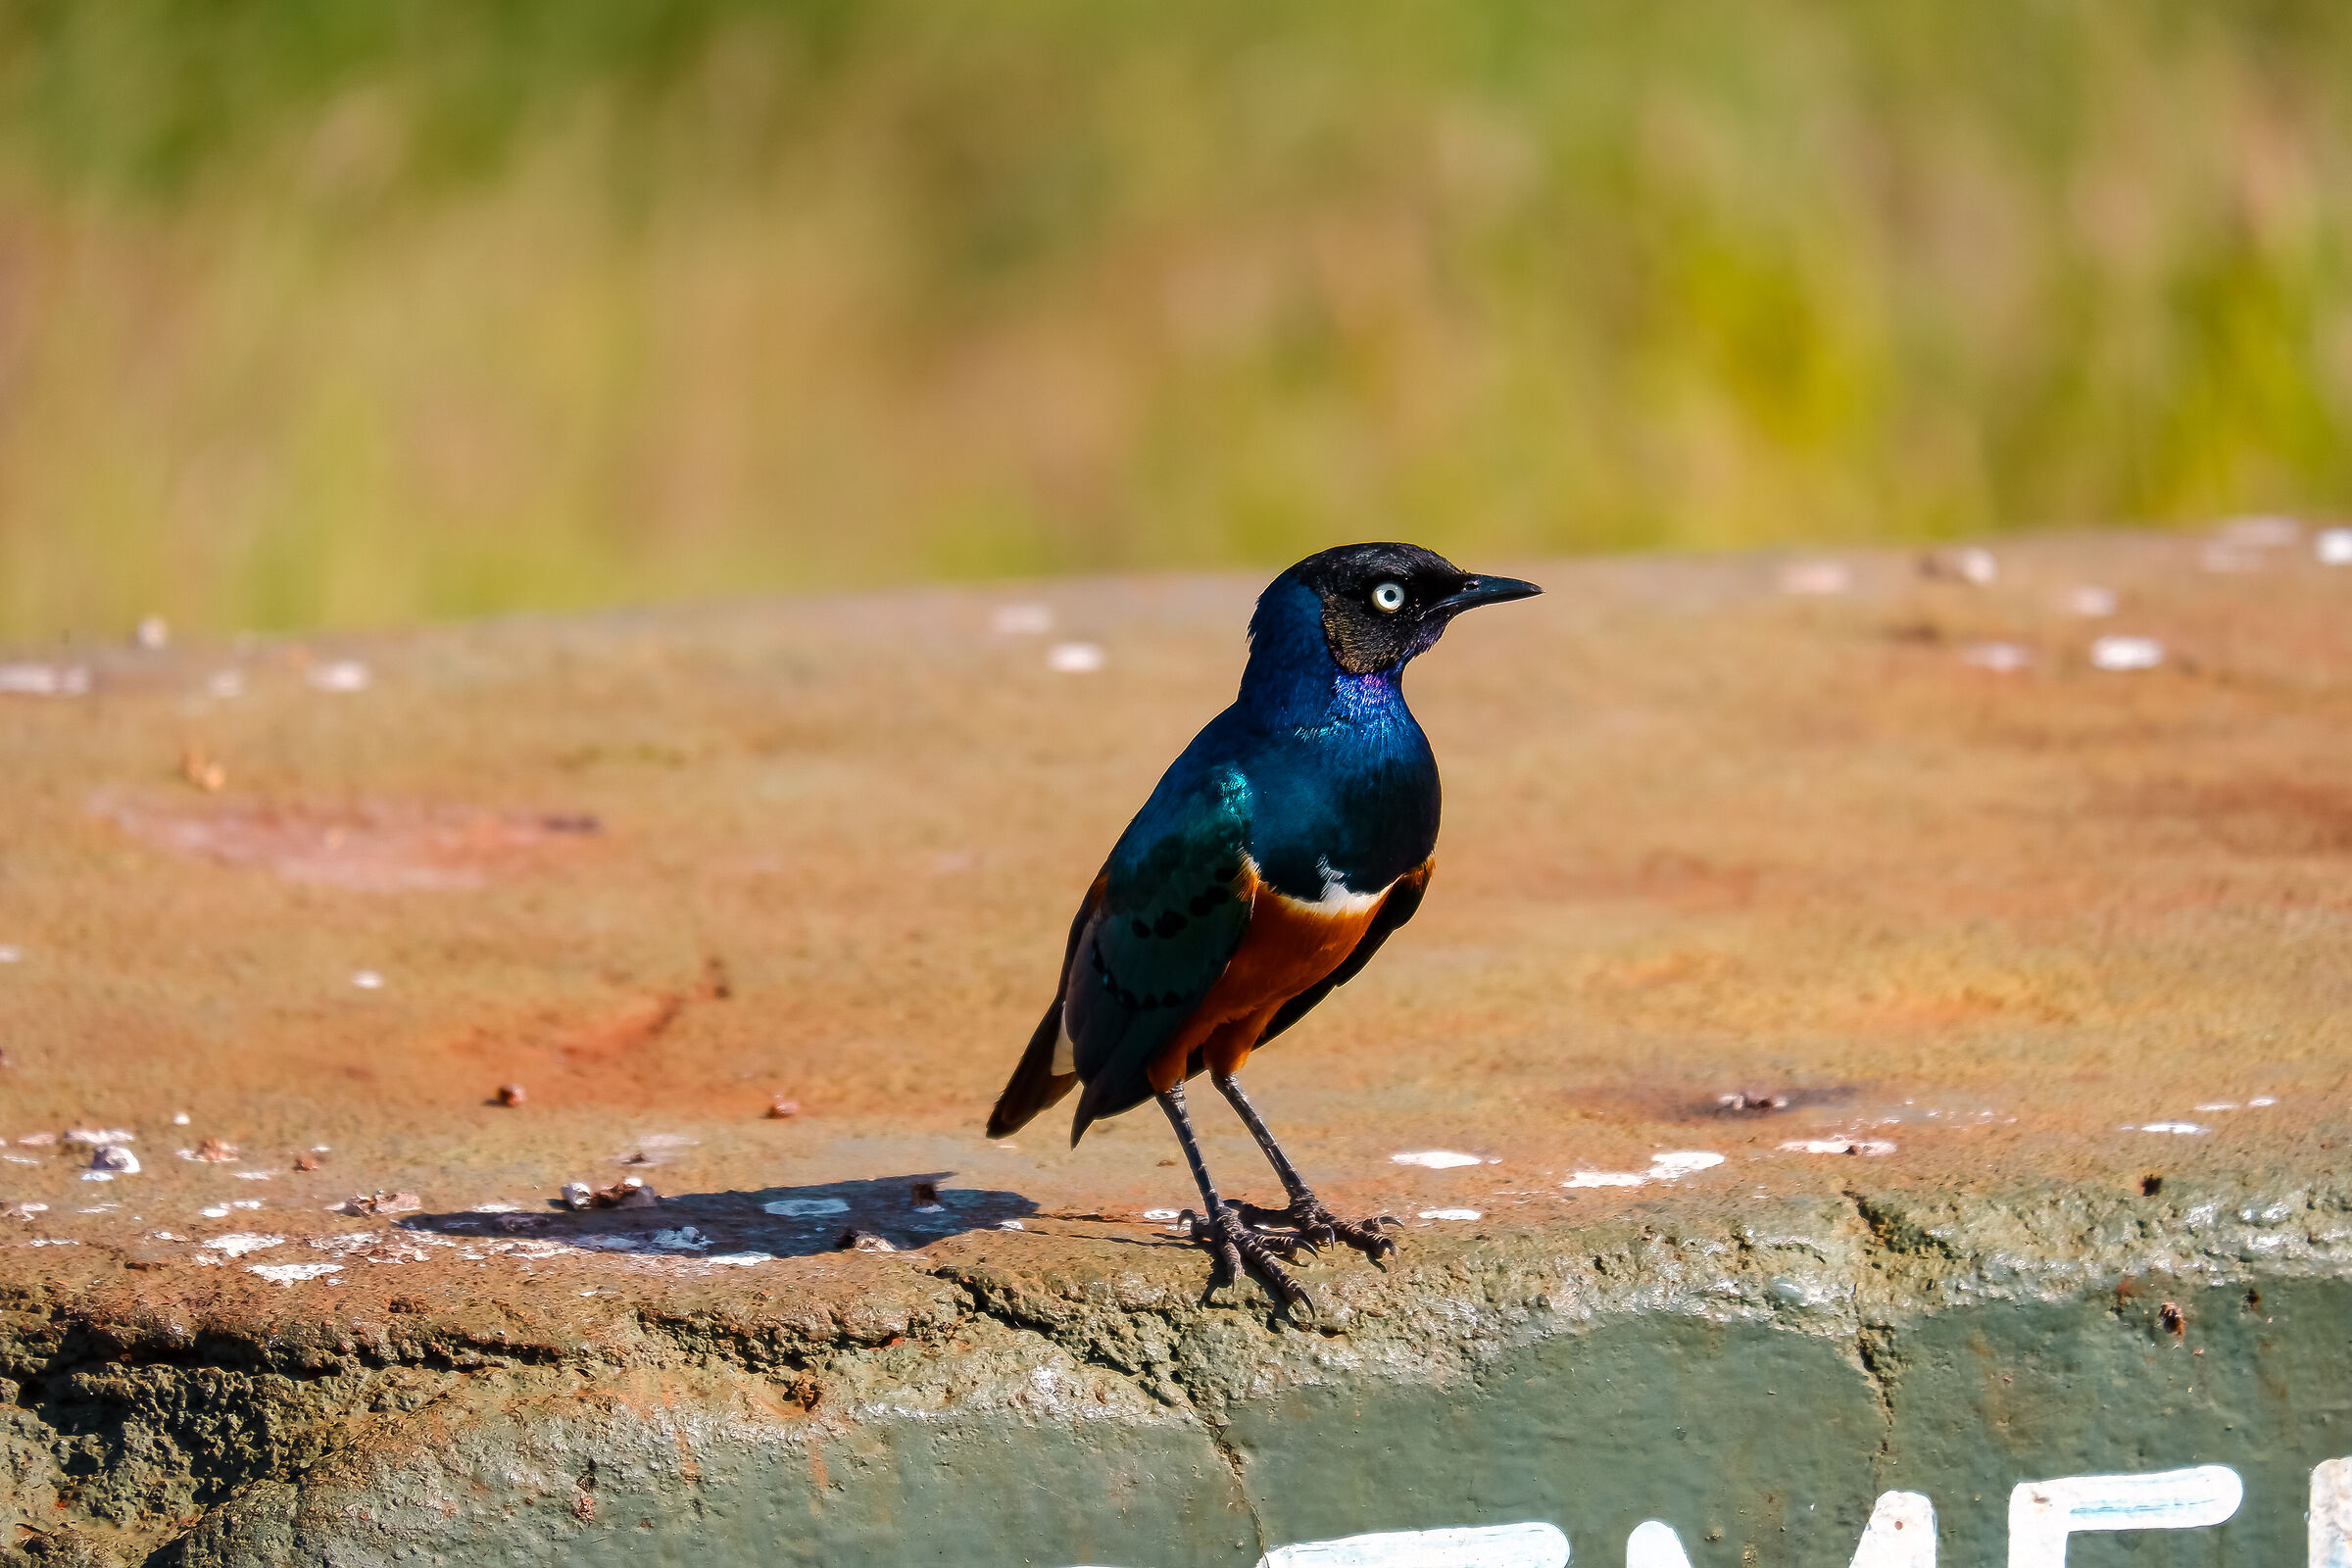 The superb starling ...